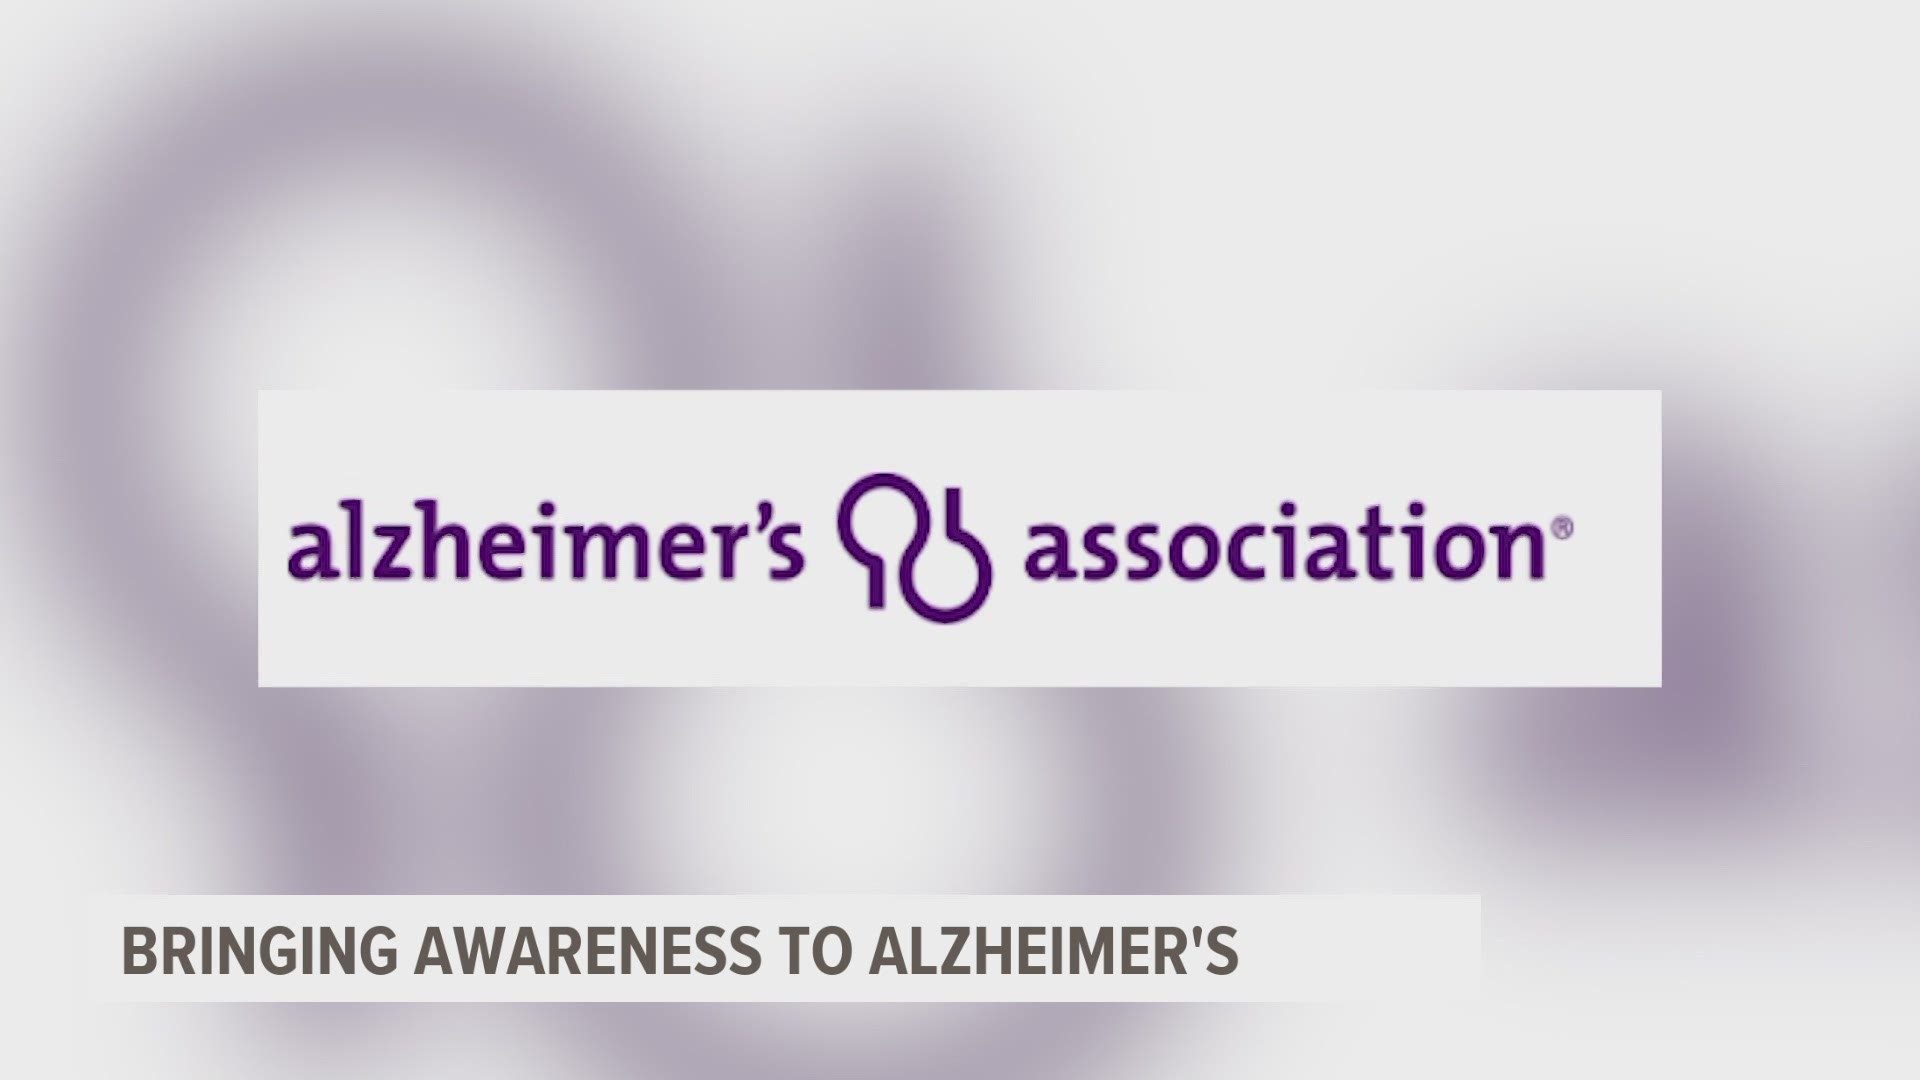 According to the Alzheimer's Association, African Americans are twice as likely to develop the disease compared to older, white Americans.